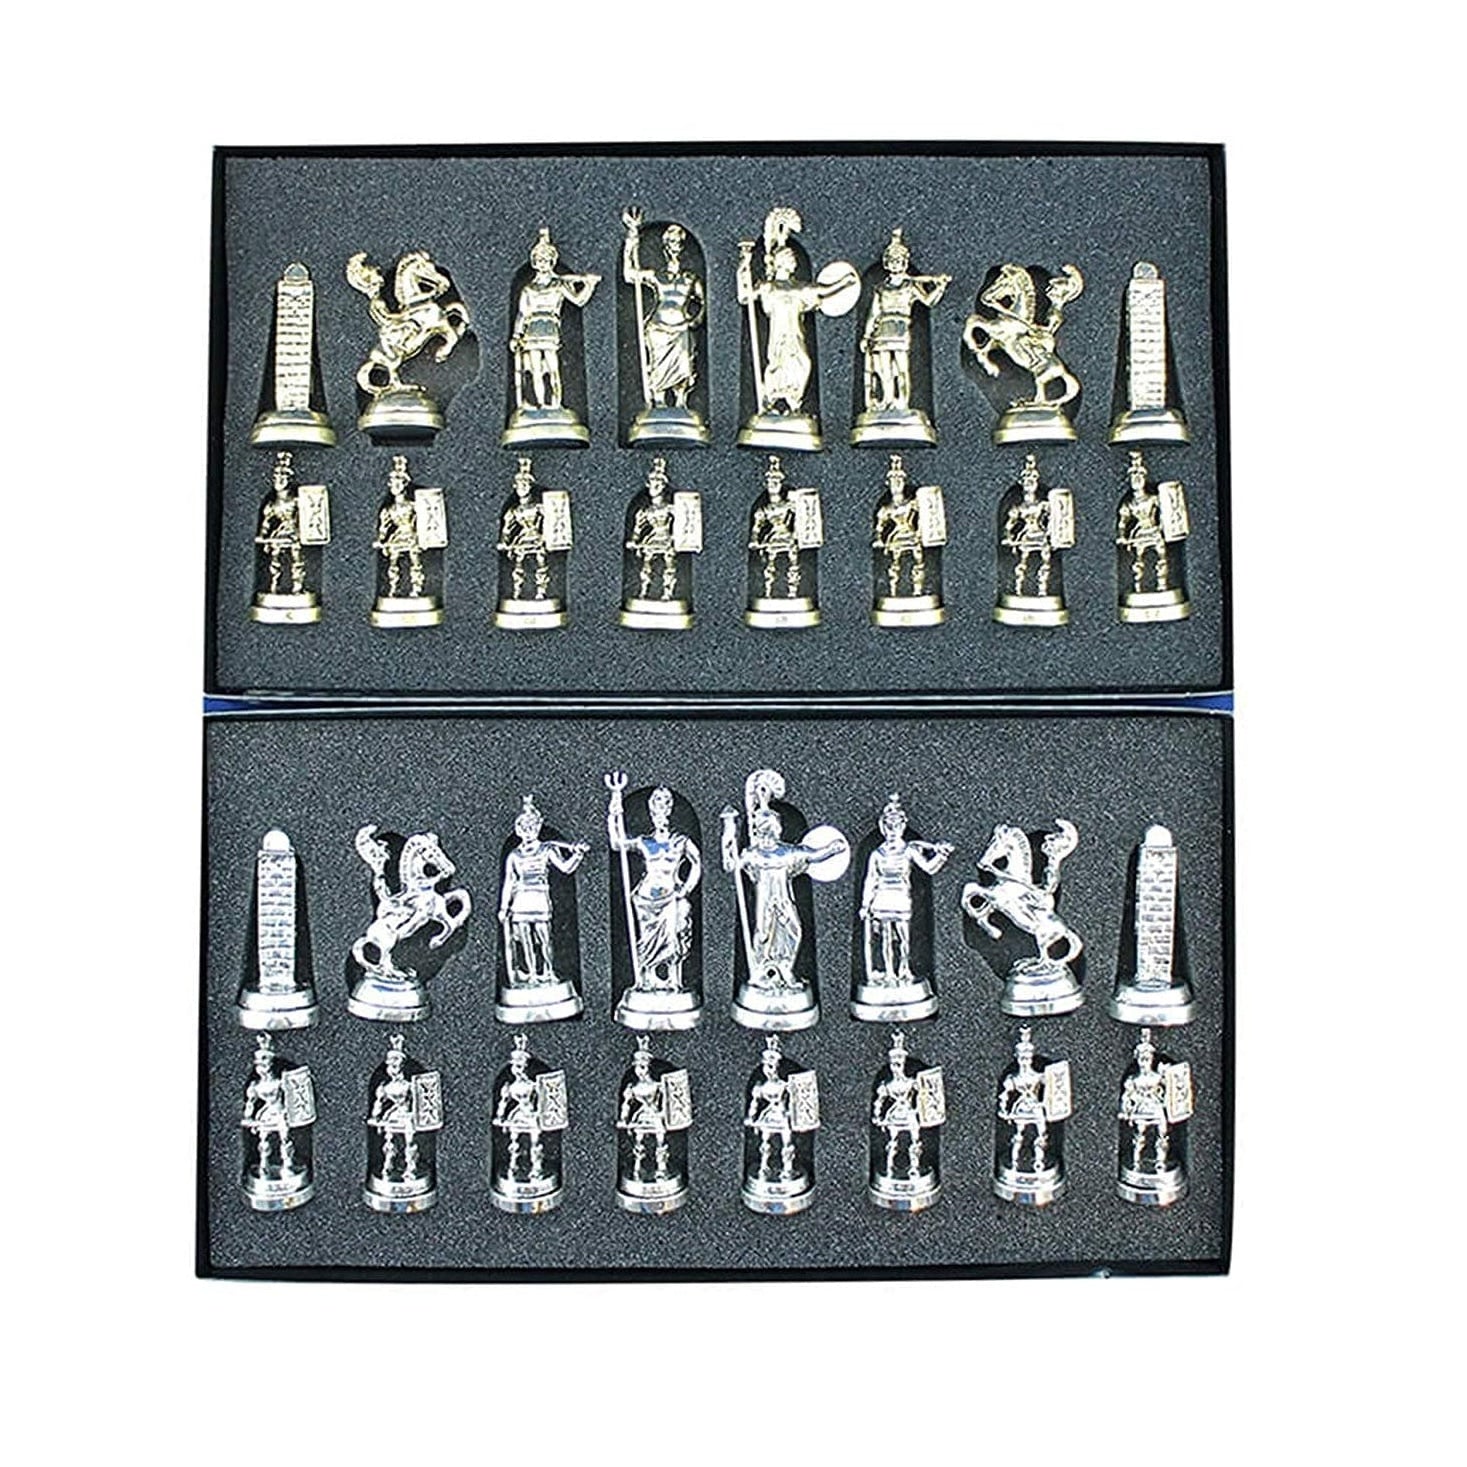 Prehistorical Roman Chess Pieces | Choose Board Or Pieces Or Both | whatagift.com.au.